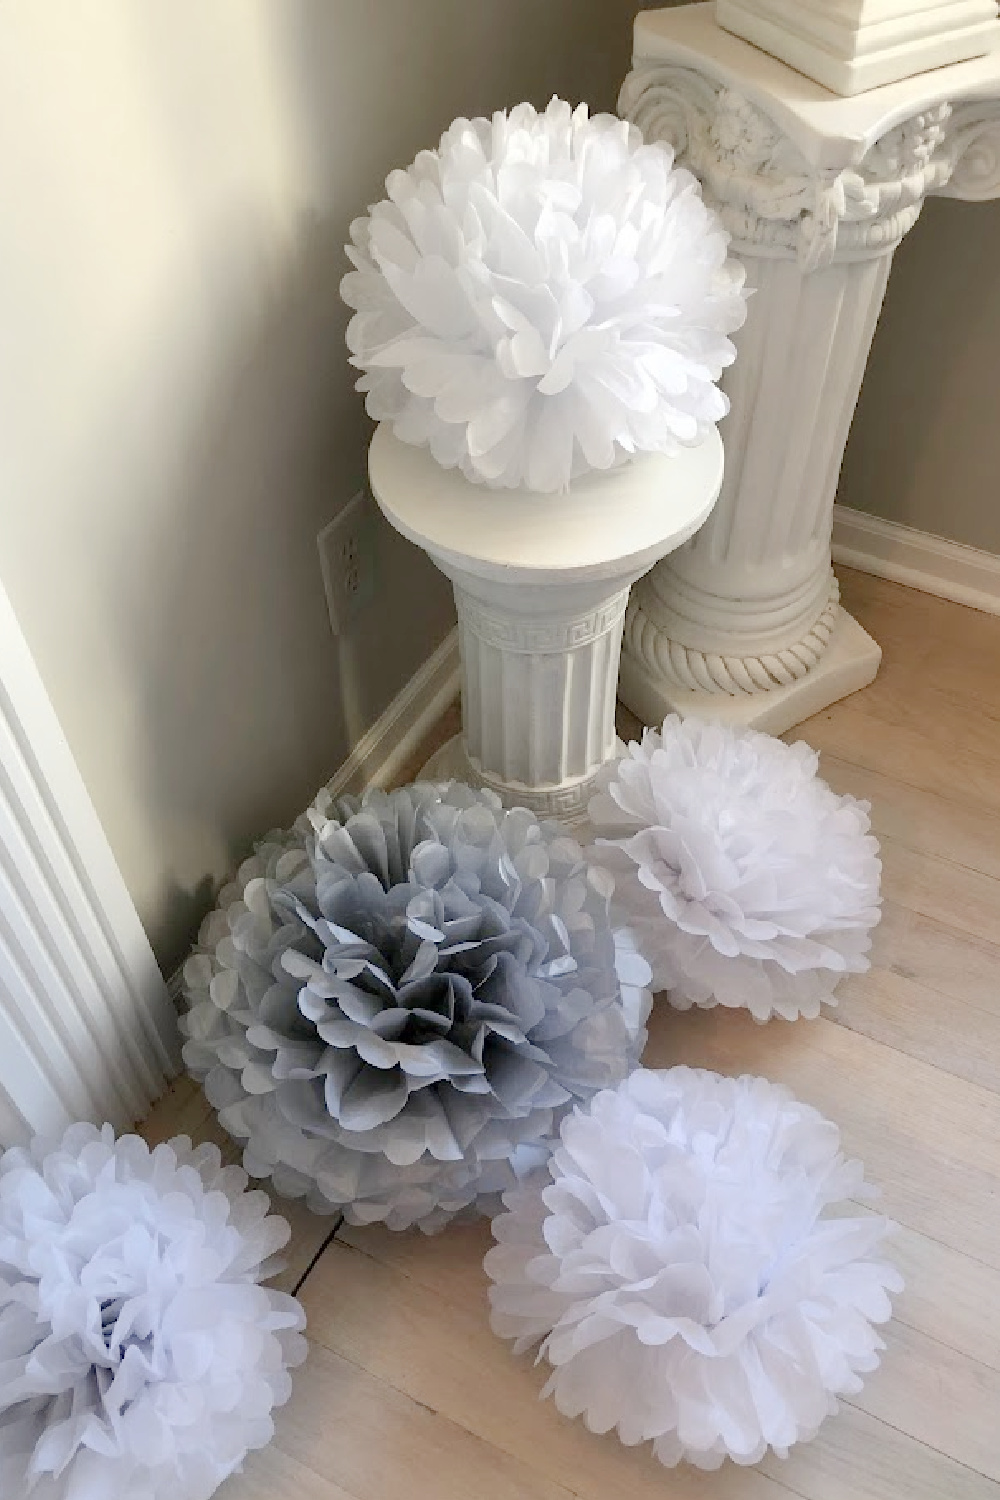 Tissue poufs were purchased to festively decorate and soften the dining room - Hello Lovely Studio.